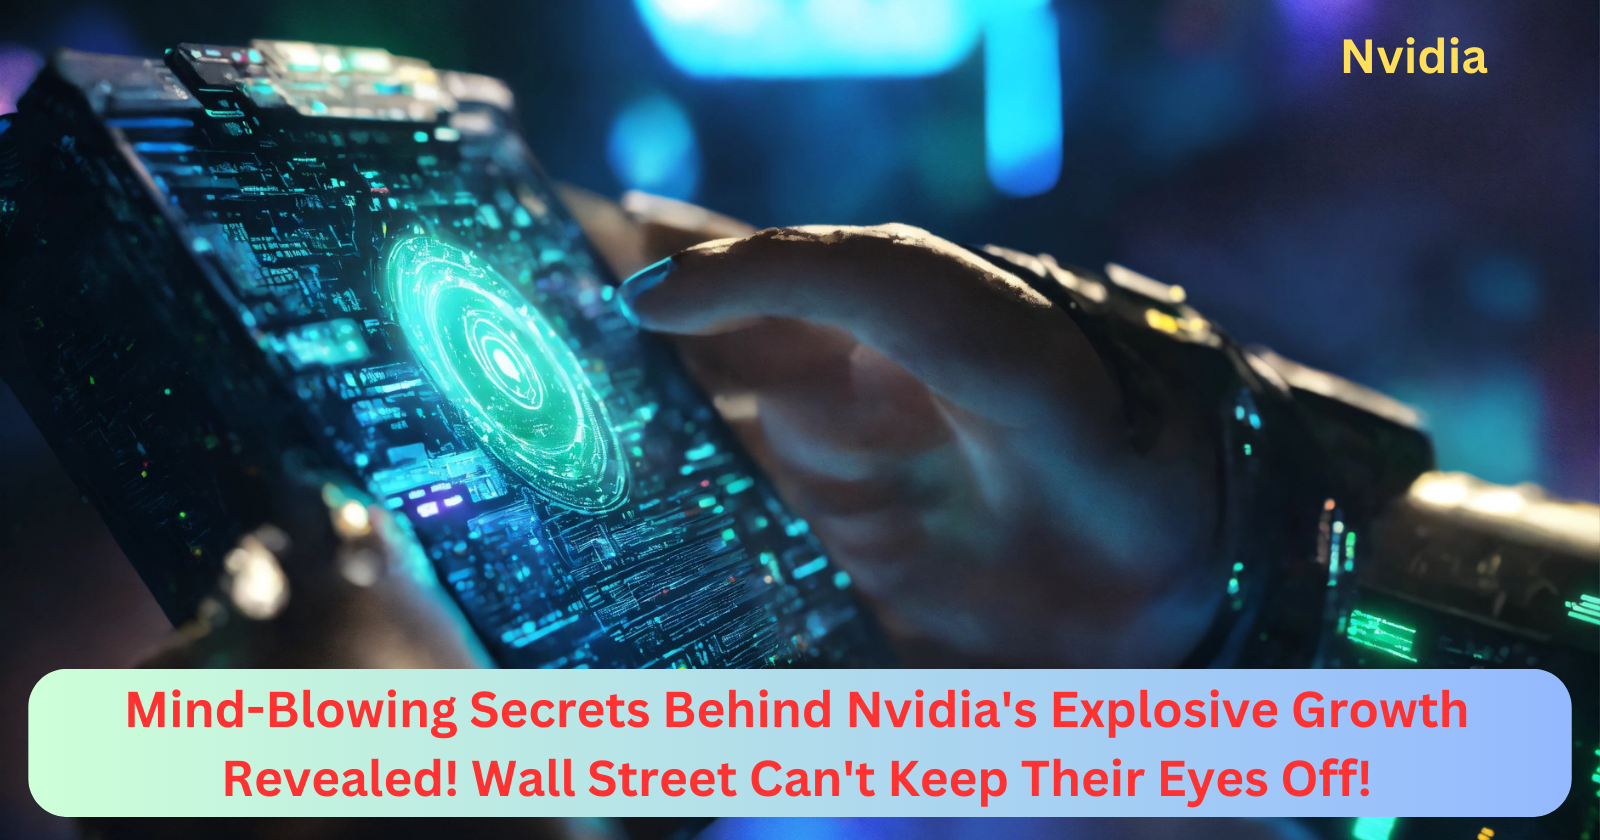 Mind-Blowing Secrets Behind Nvidia's Explosive Growth Revealed! Wall Street Can't Keep Their Eyes Off!